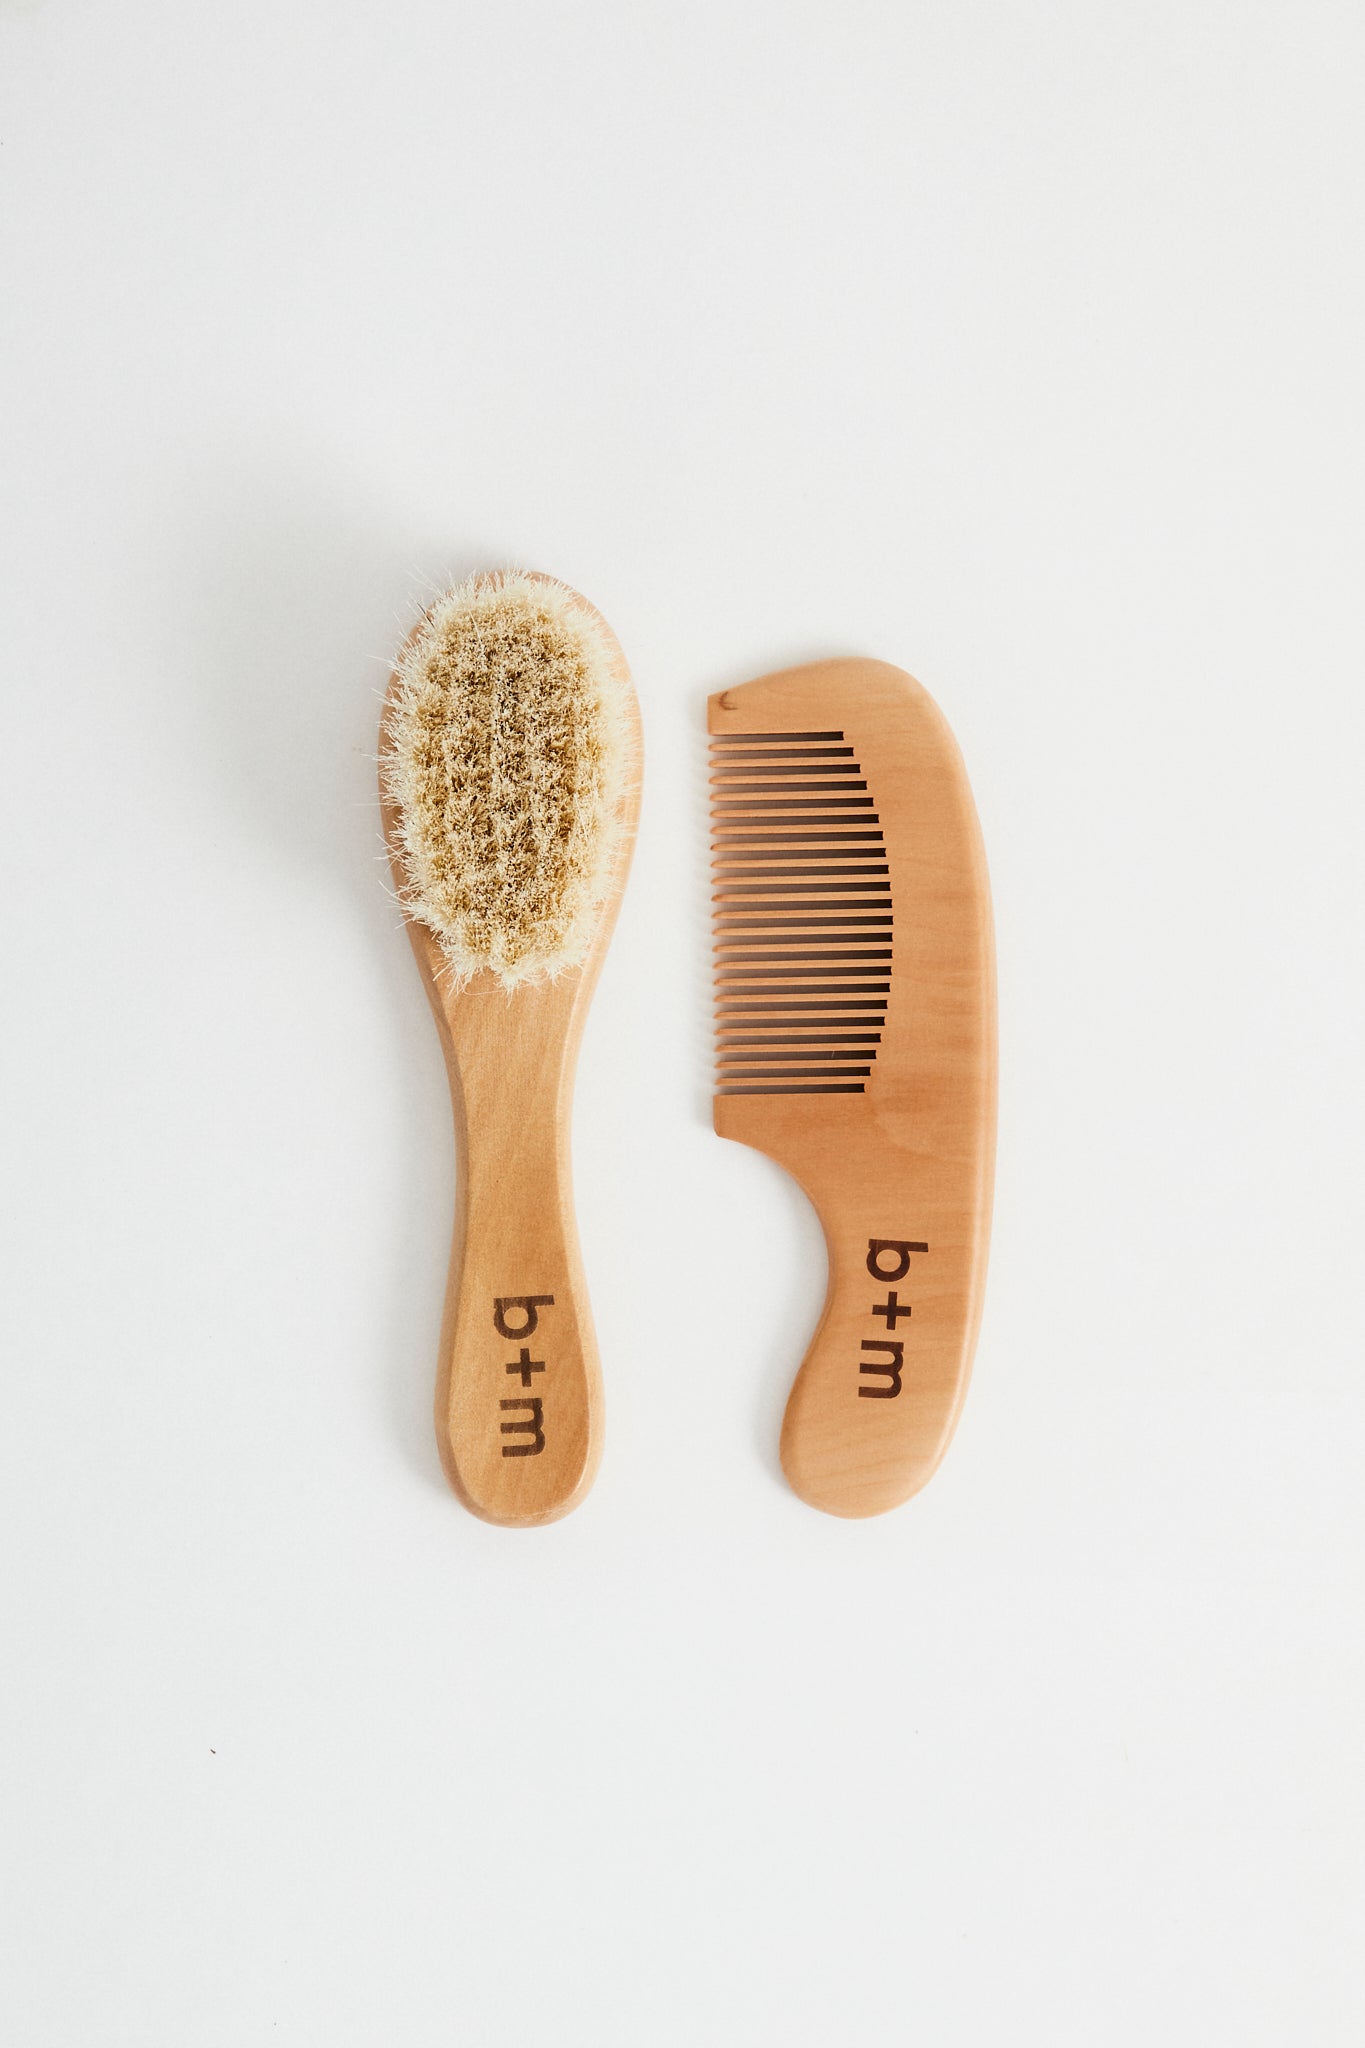 baby wooden brush and comb set with goat hair bristles. b + m engraved on handles. 